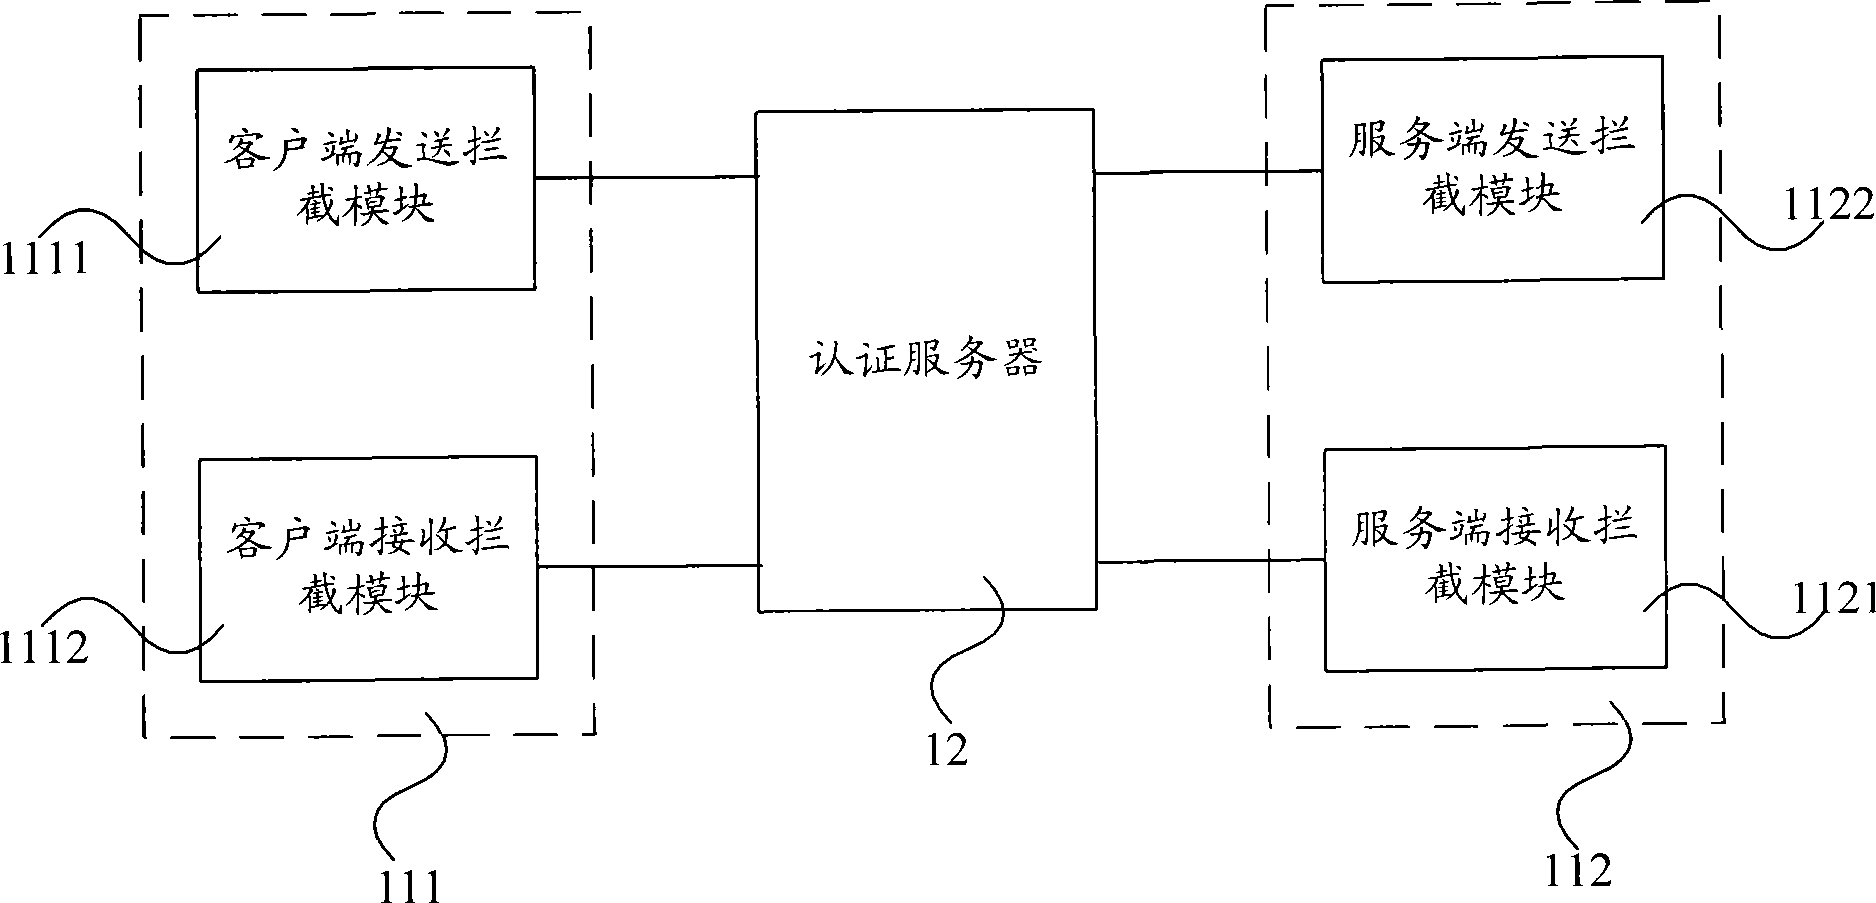 Network authentication service system and method